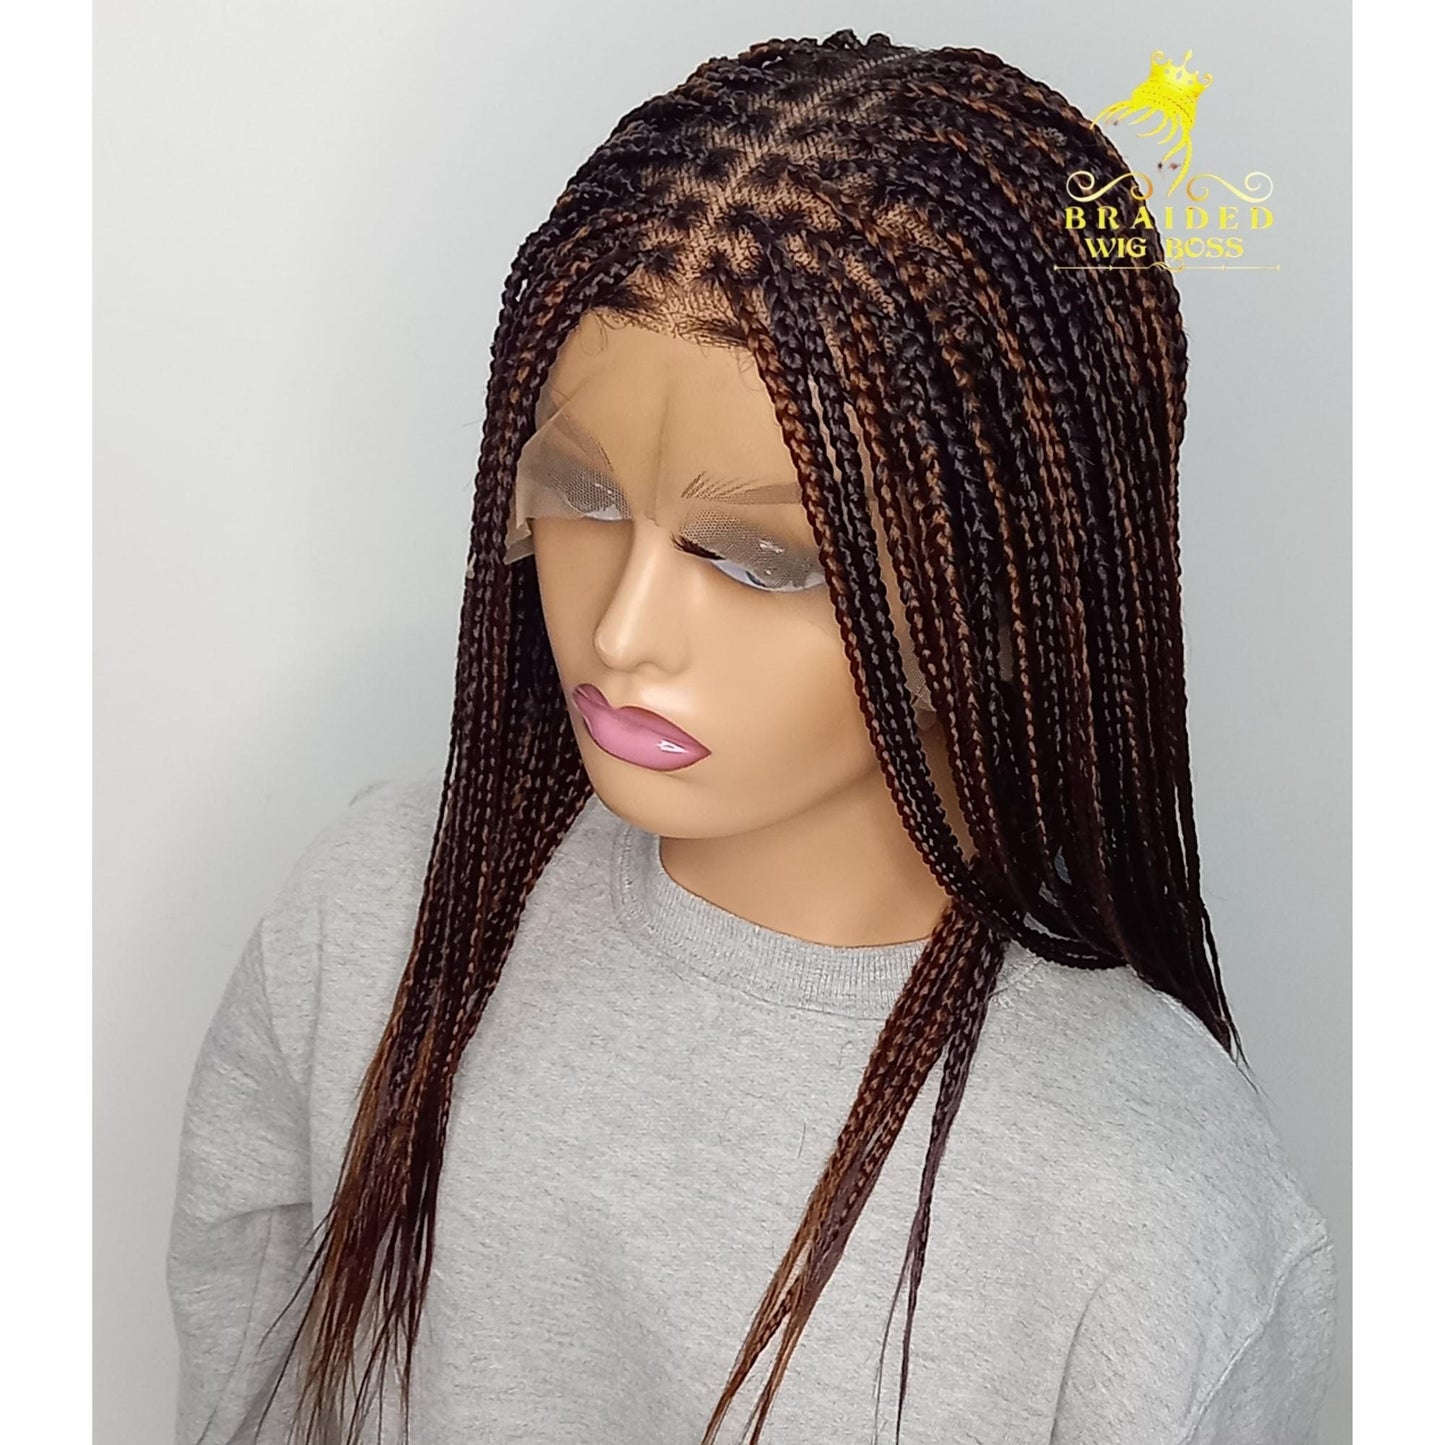 Knotless Braids Wig - Full Lace & Lace Frontal - 30/33 Mix - All Lengths - For Black Women